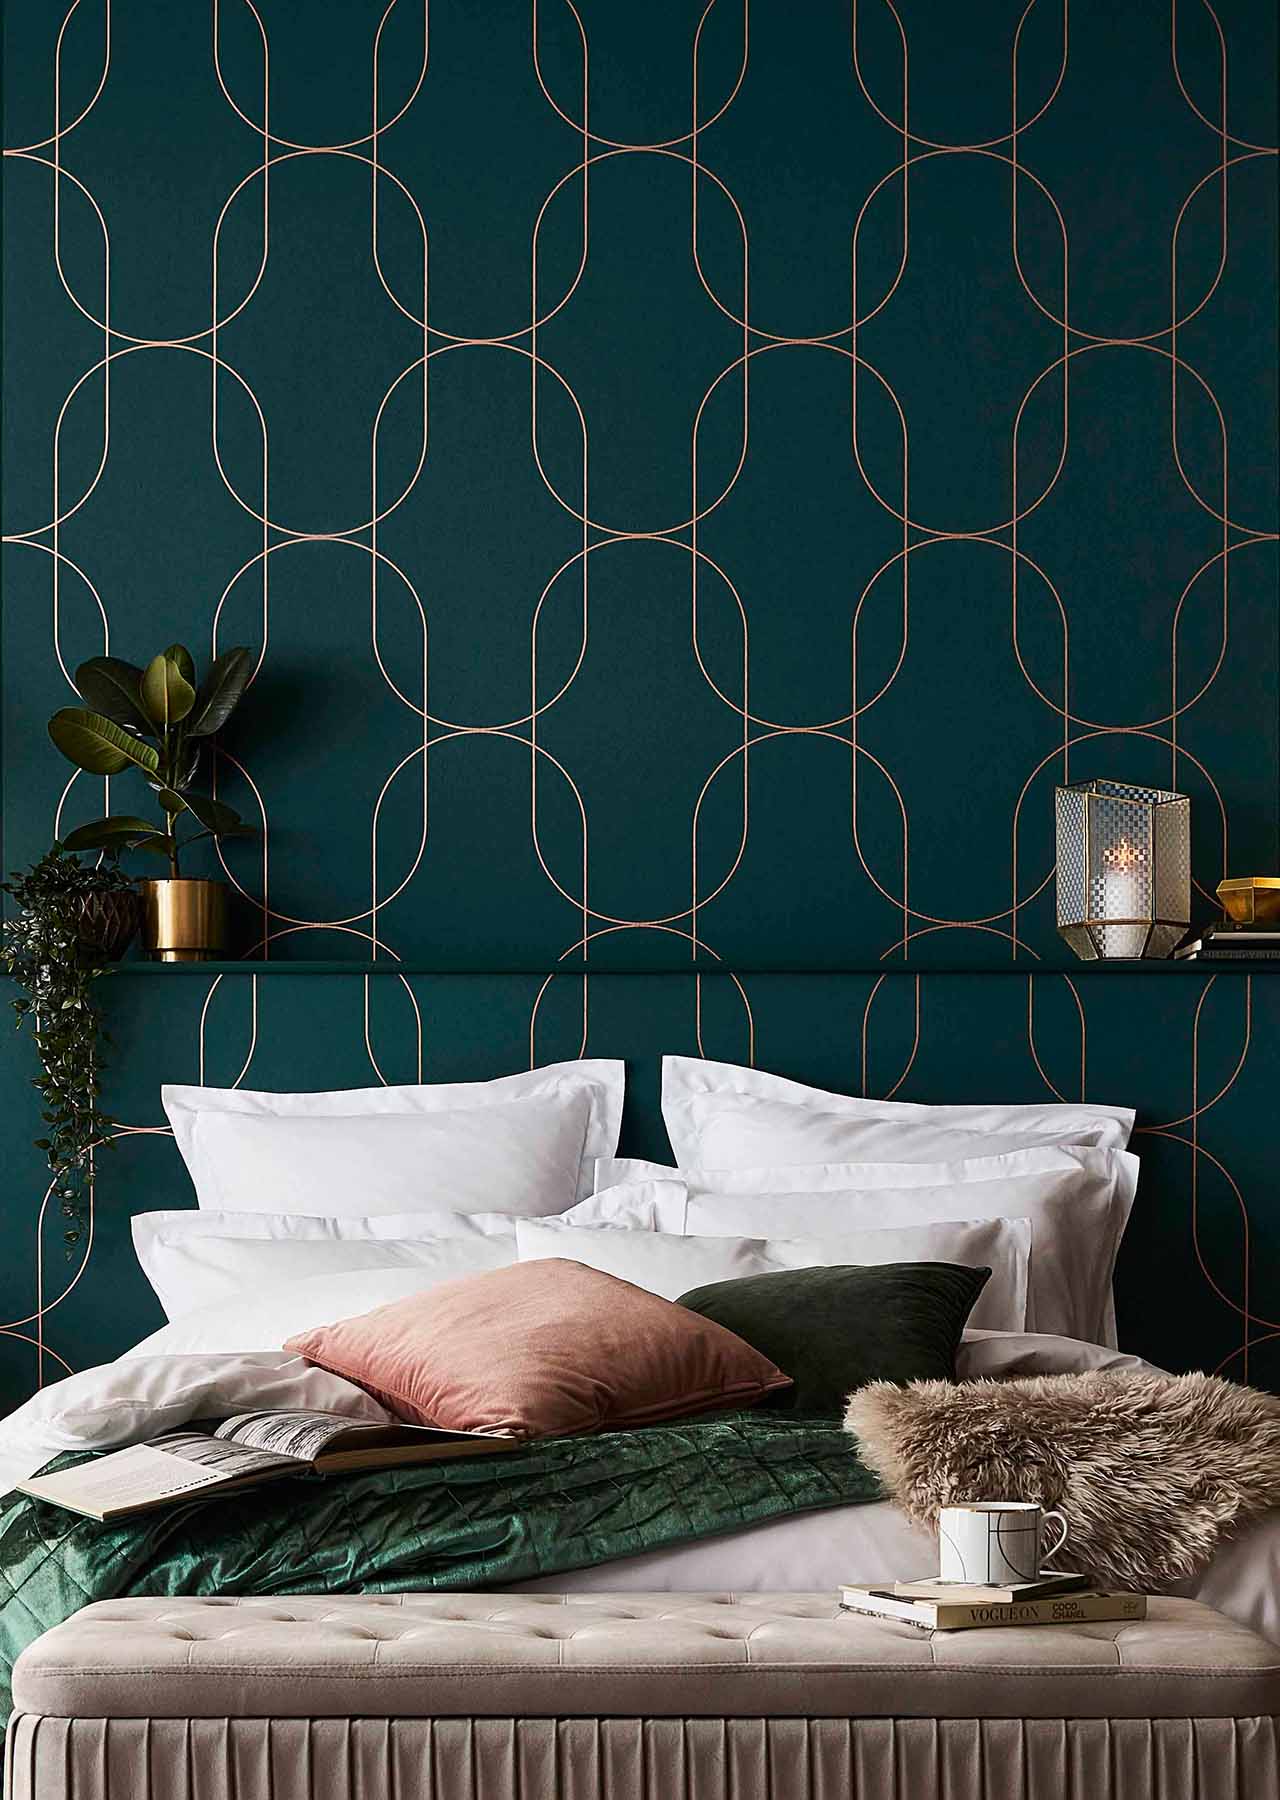 Bedroom wallpaper ideas: 23 ways to create the perfect mood |